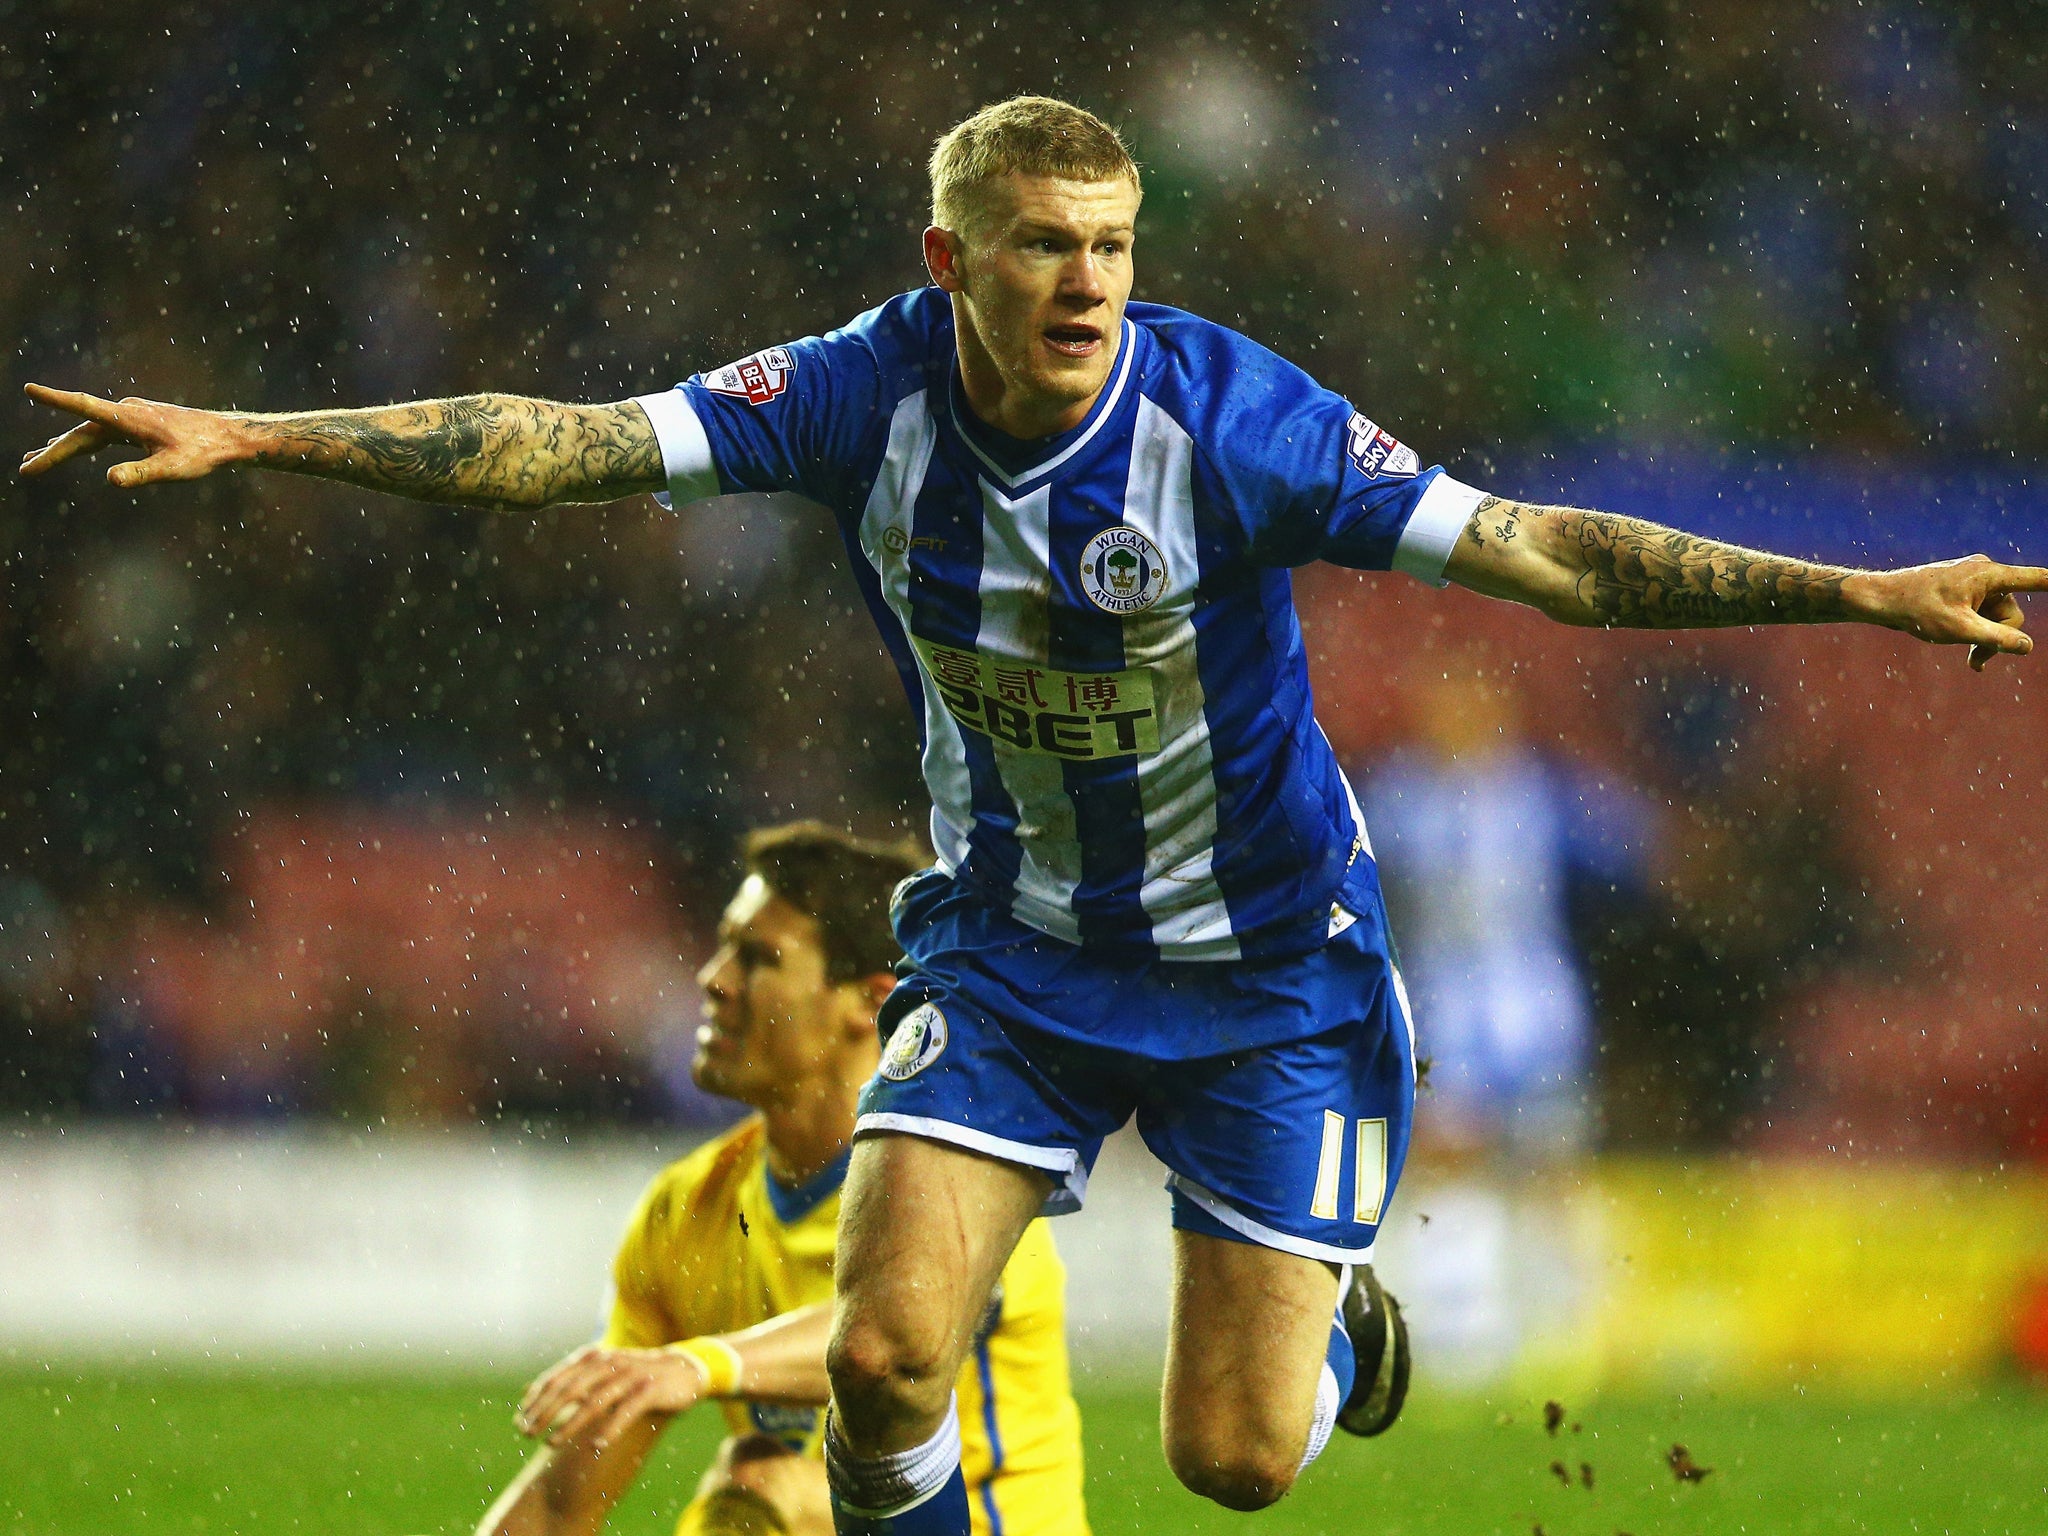 James McClean celebrates after scoring the winner for Wigan against Crystal Palace in the FA Cup